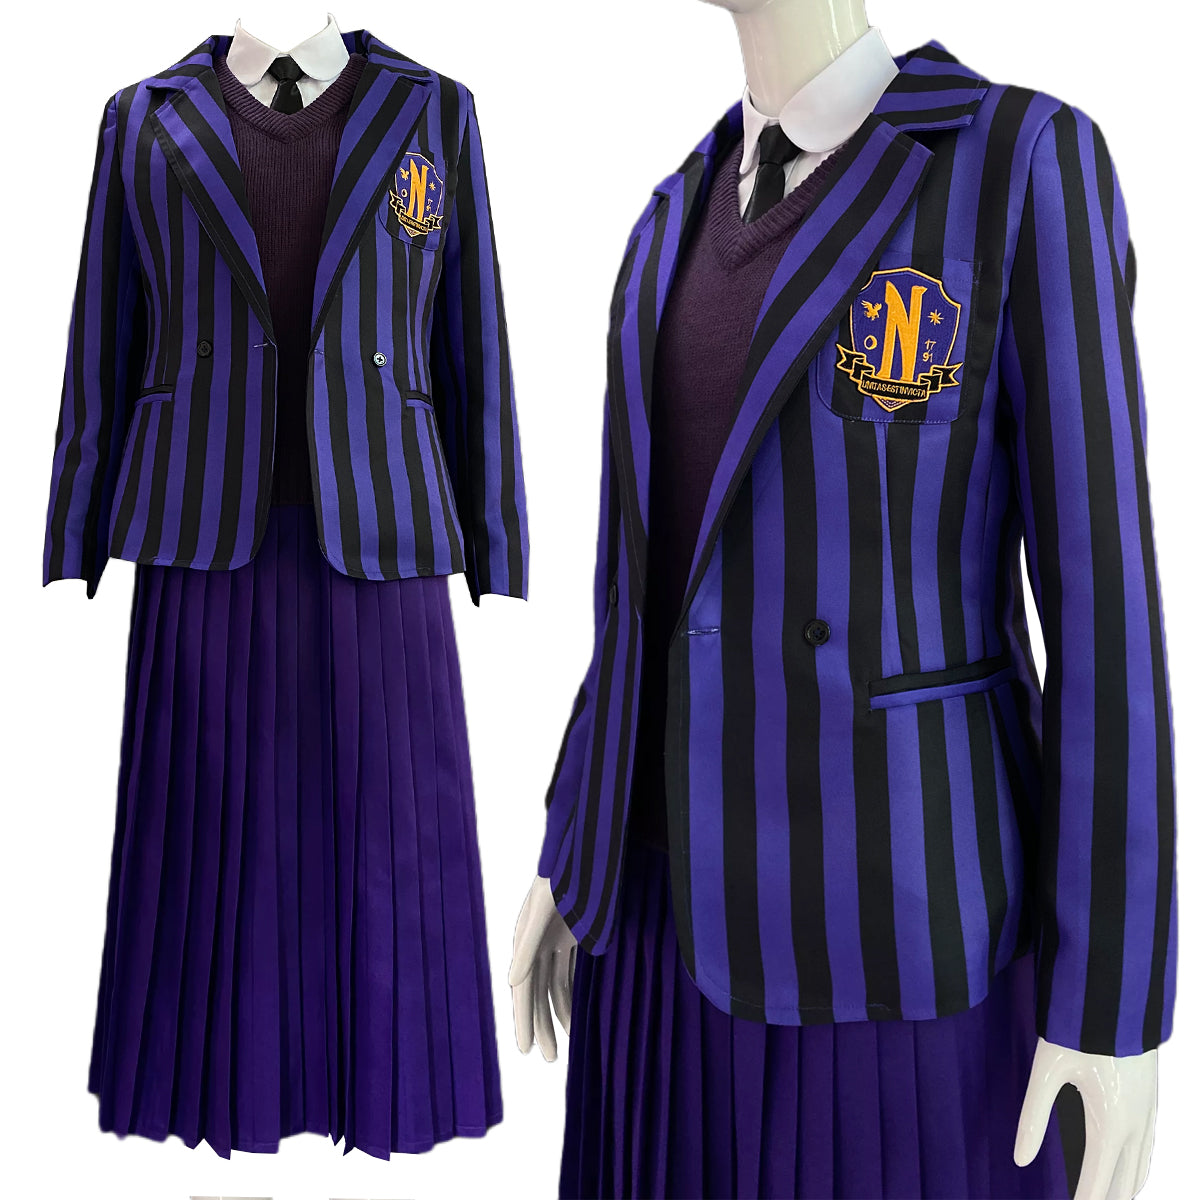 HOLOUN Wednesday Enid Sinclai Bianca Nevermore School Cosplay Costume Blue Uniform Dress Sweater Embroidery Suit Christmas Gift